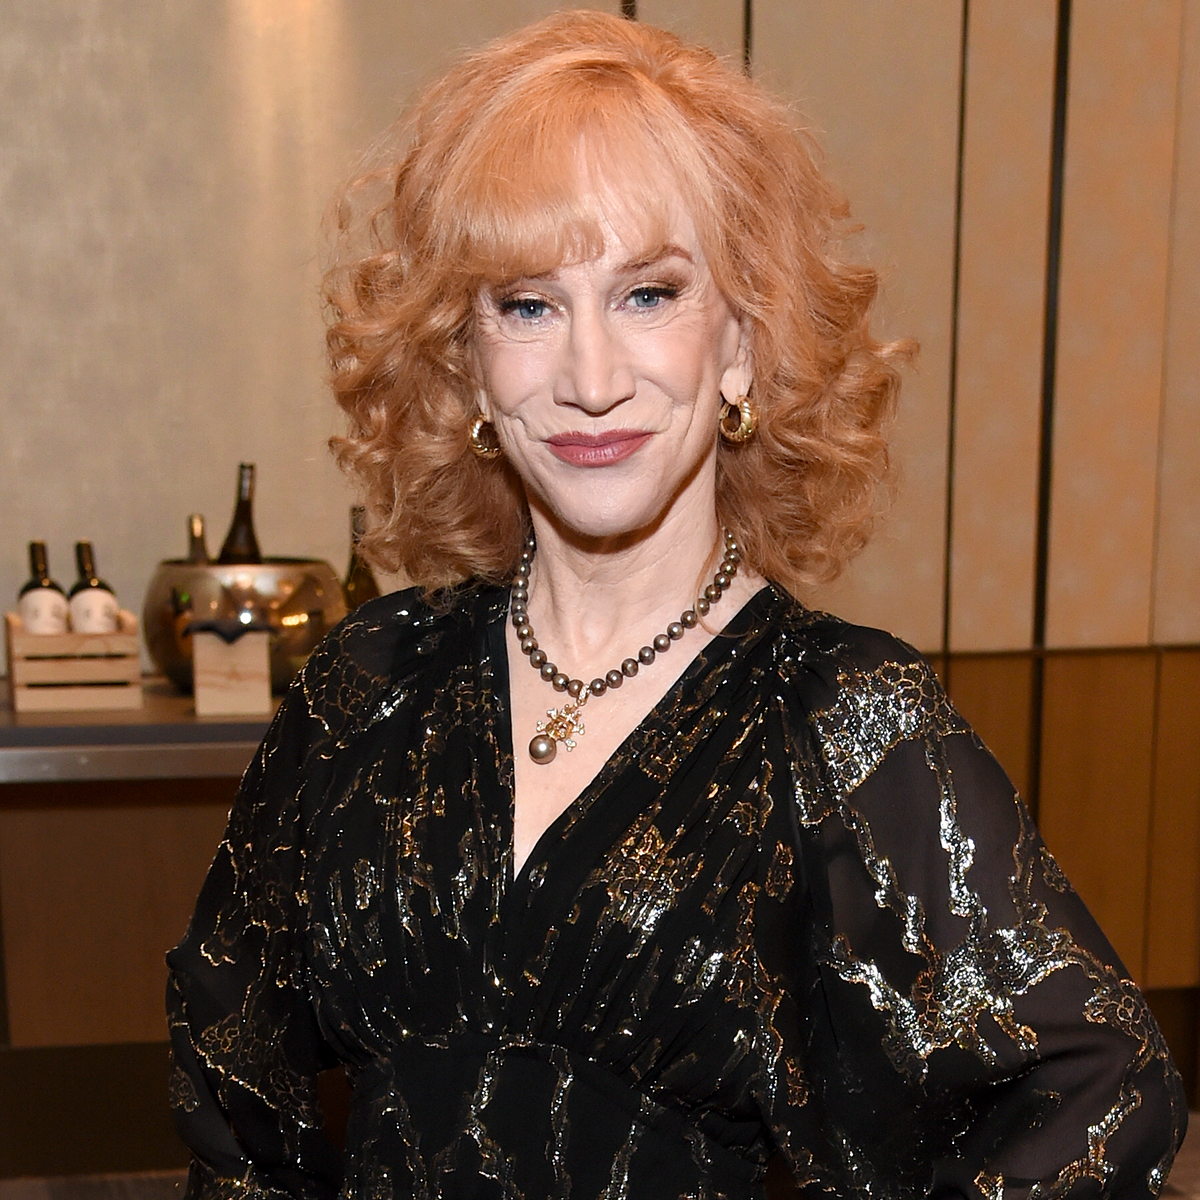 Kathy Griffin Diagnosed With “Extreme Case” of Complex PTSD